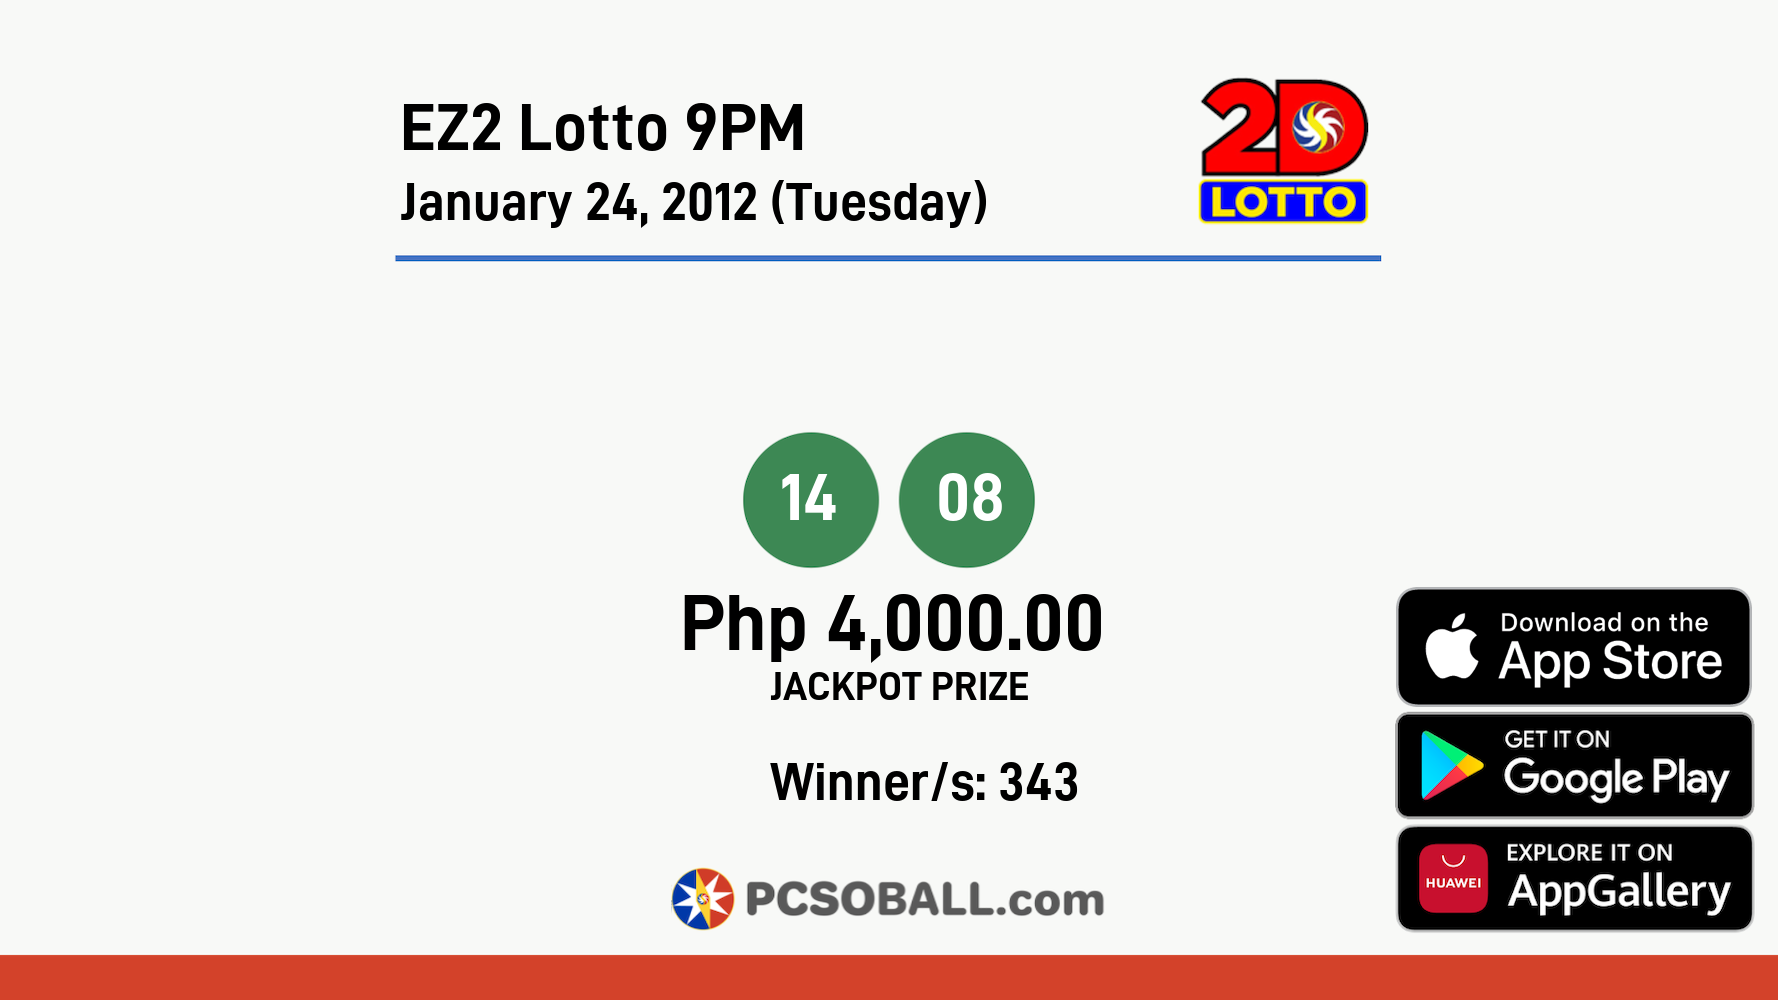 EZ2 Lotto 9PM January 24, 2012 (Tuesday) Result